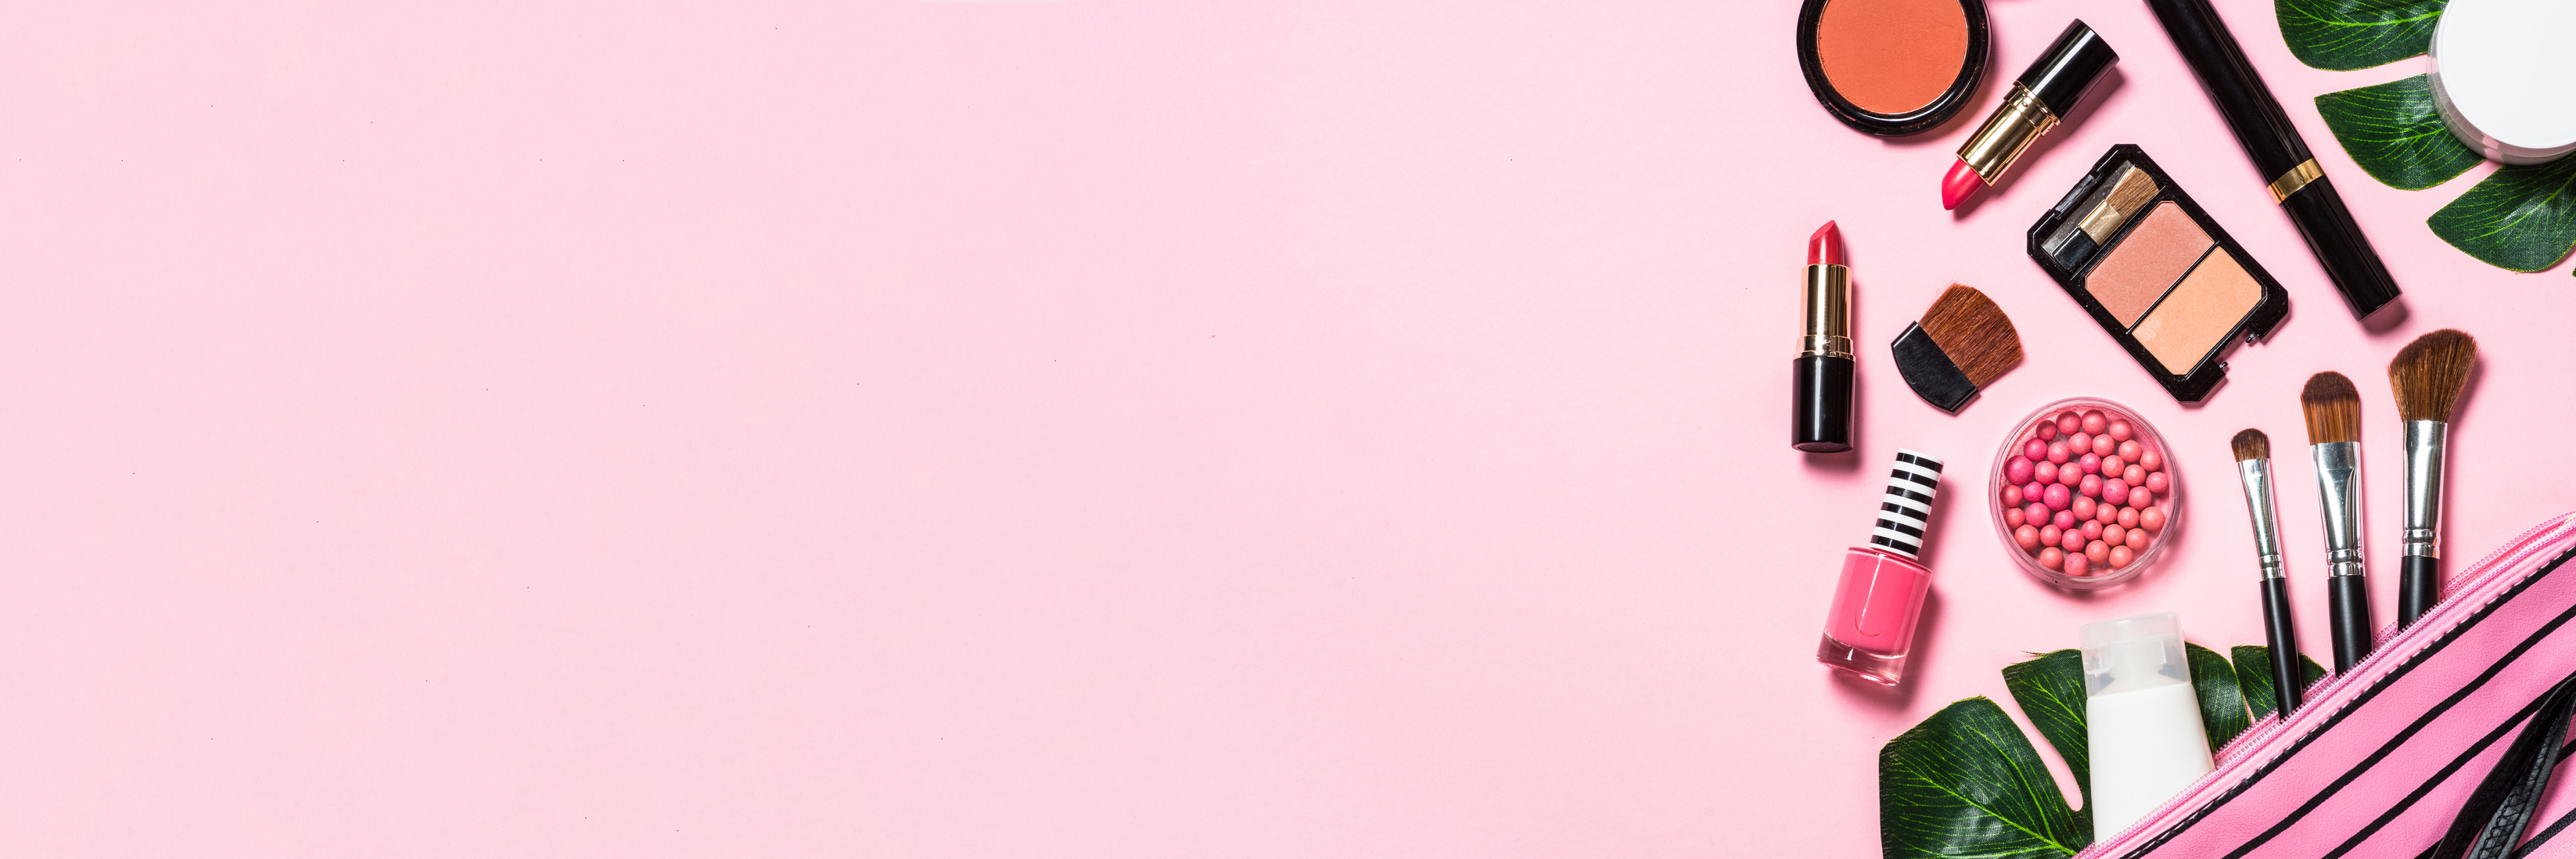 Cosmetics on Pink Background